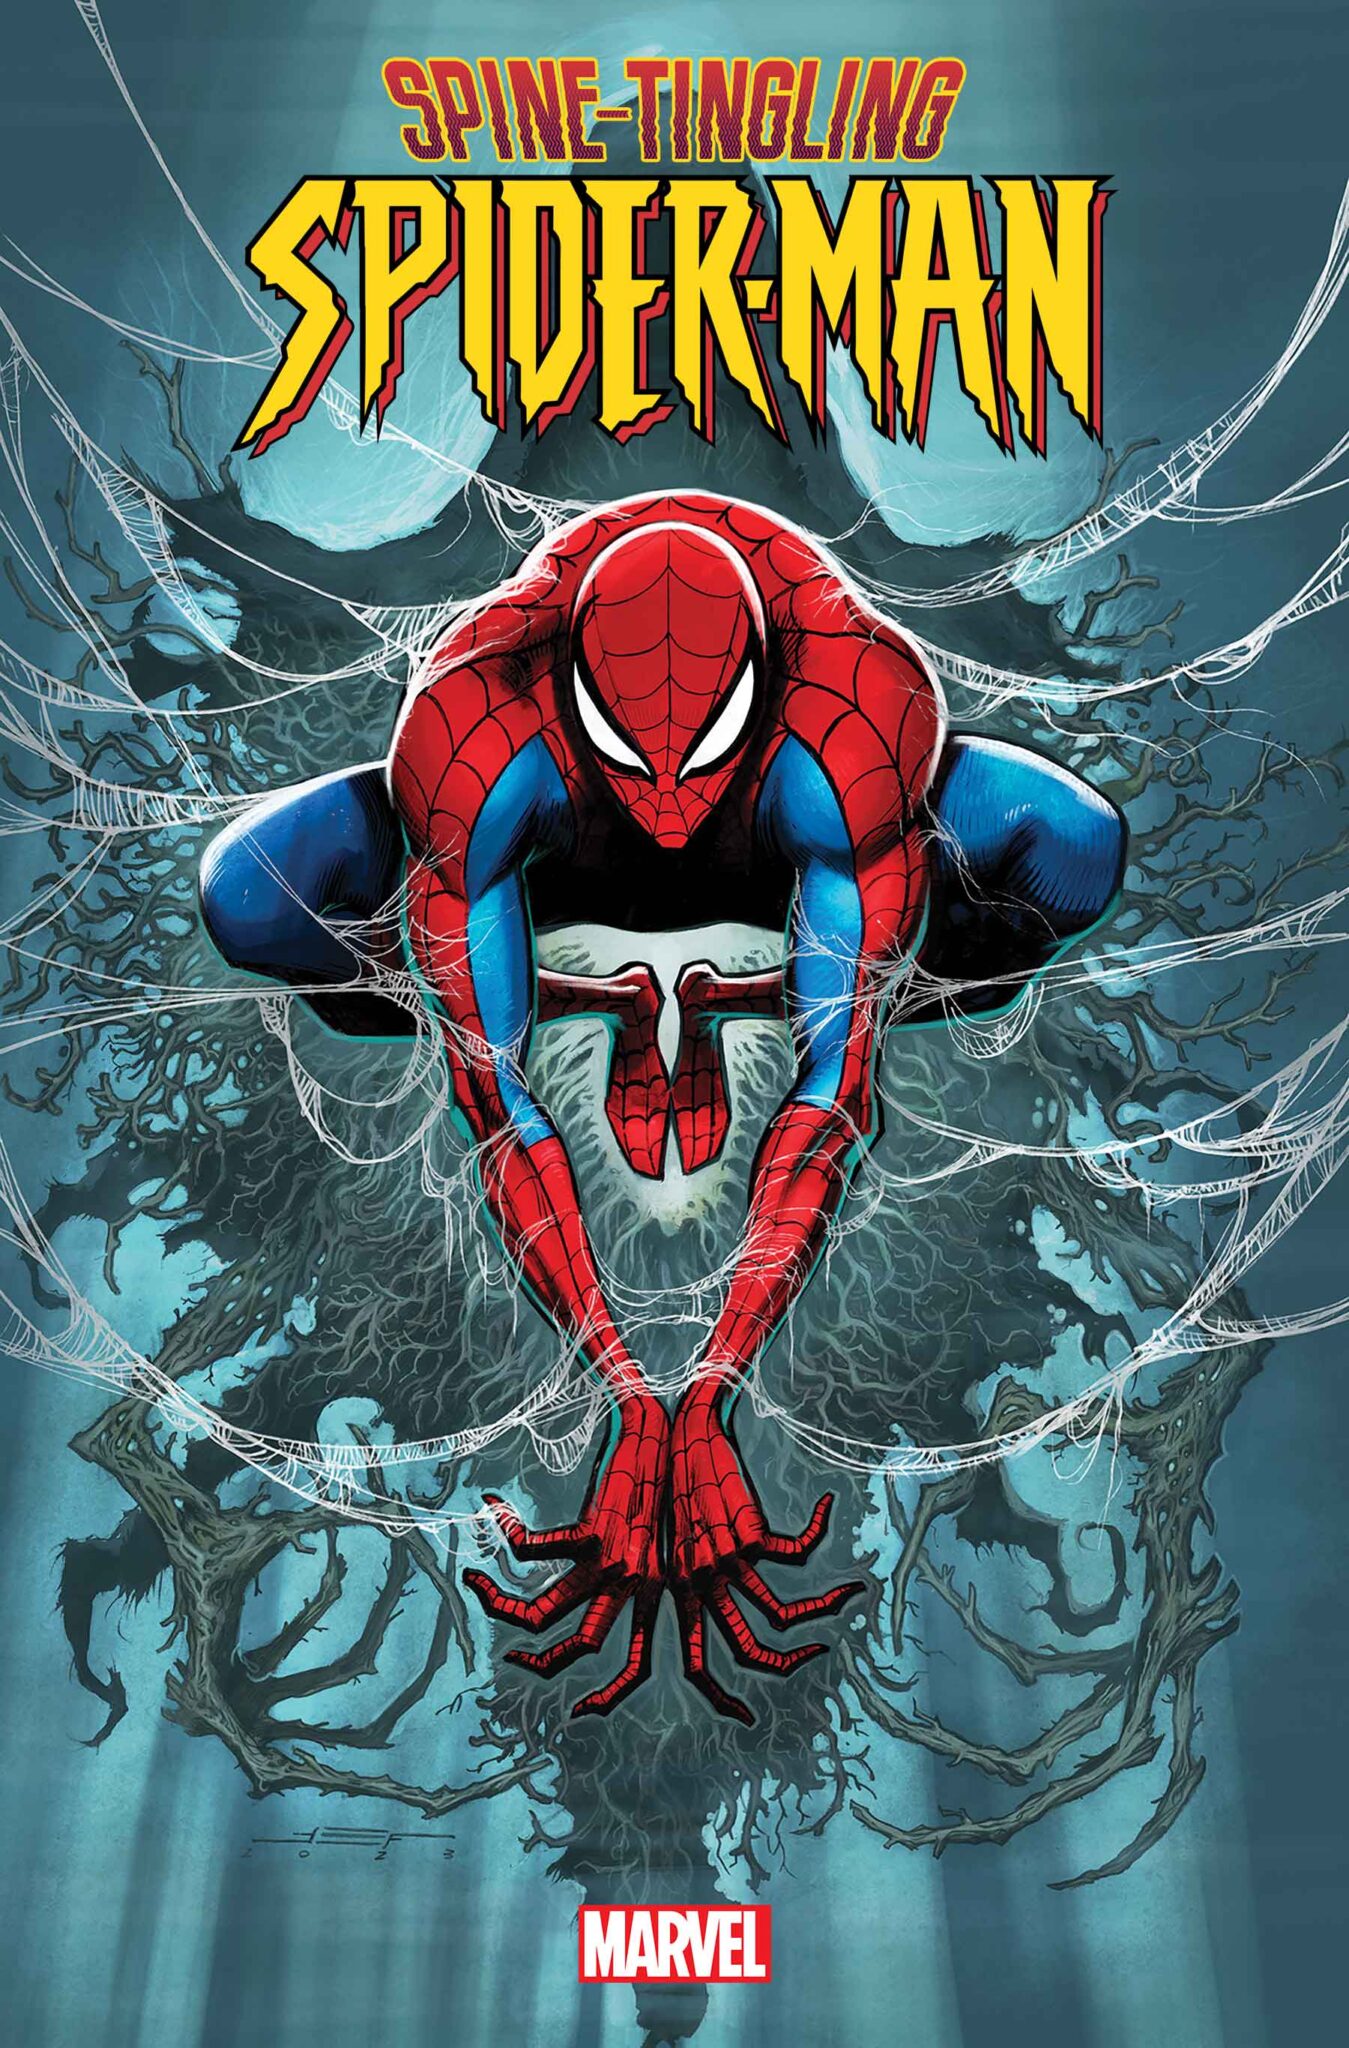 Spine-Tingling Spider-Man cover